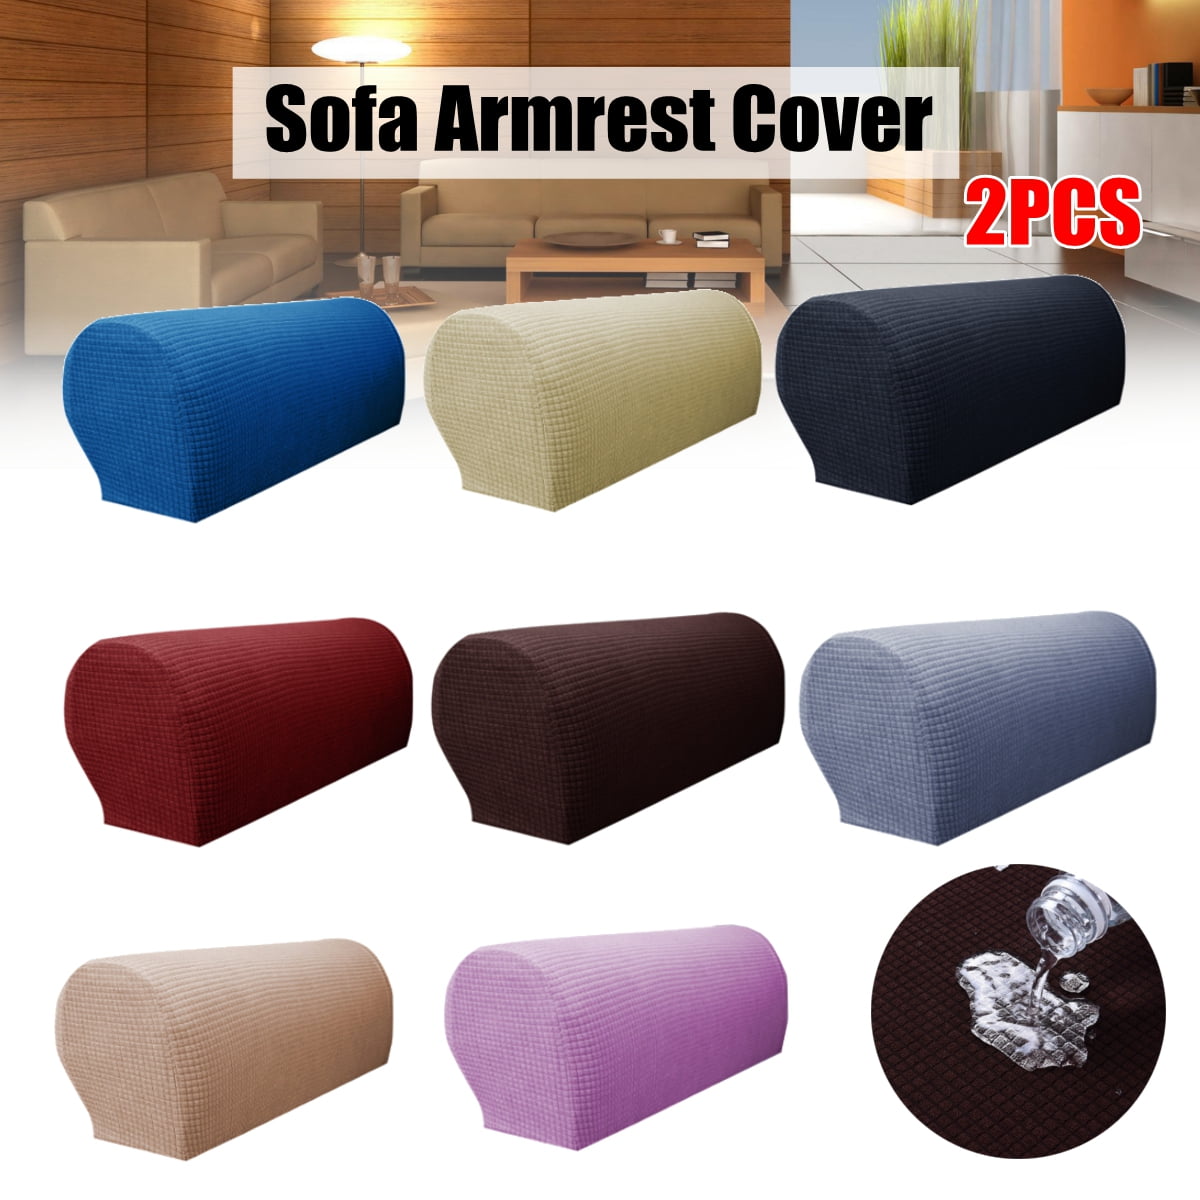 Removable Arm Chair Slipcovers Protector Sofa Covers Armrest Stretch Furniture 